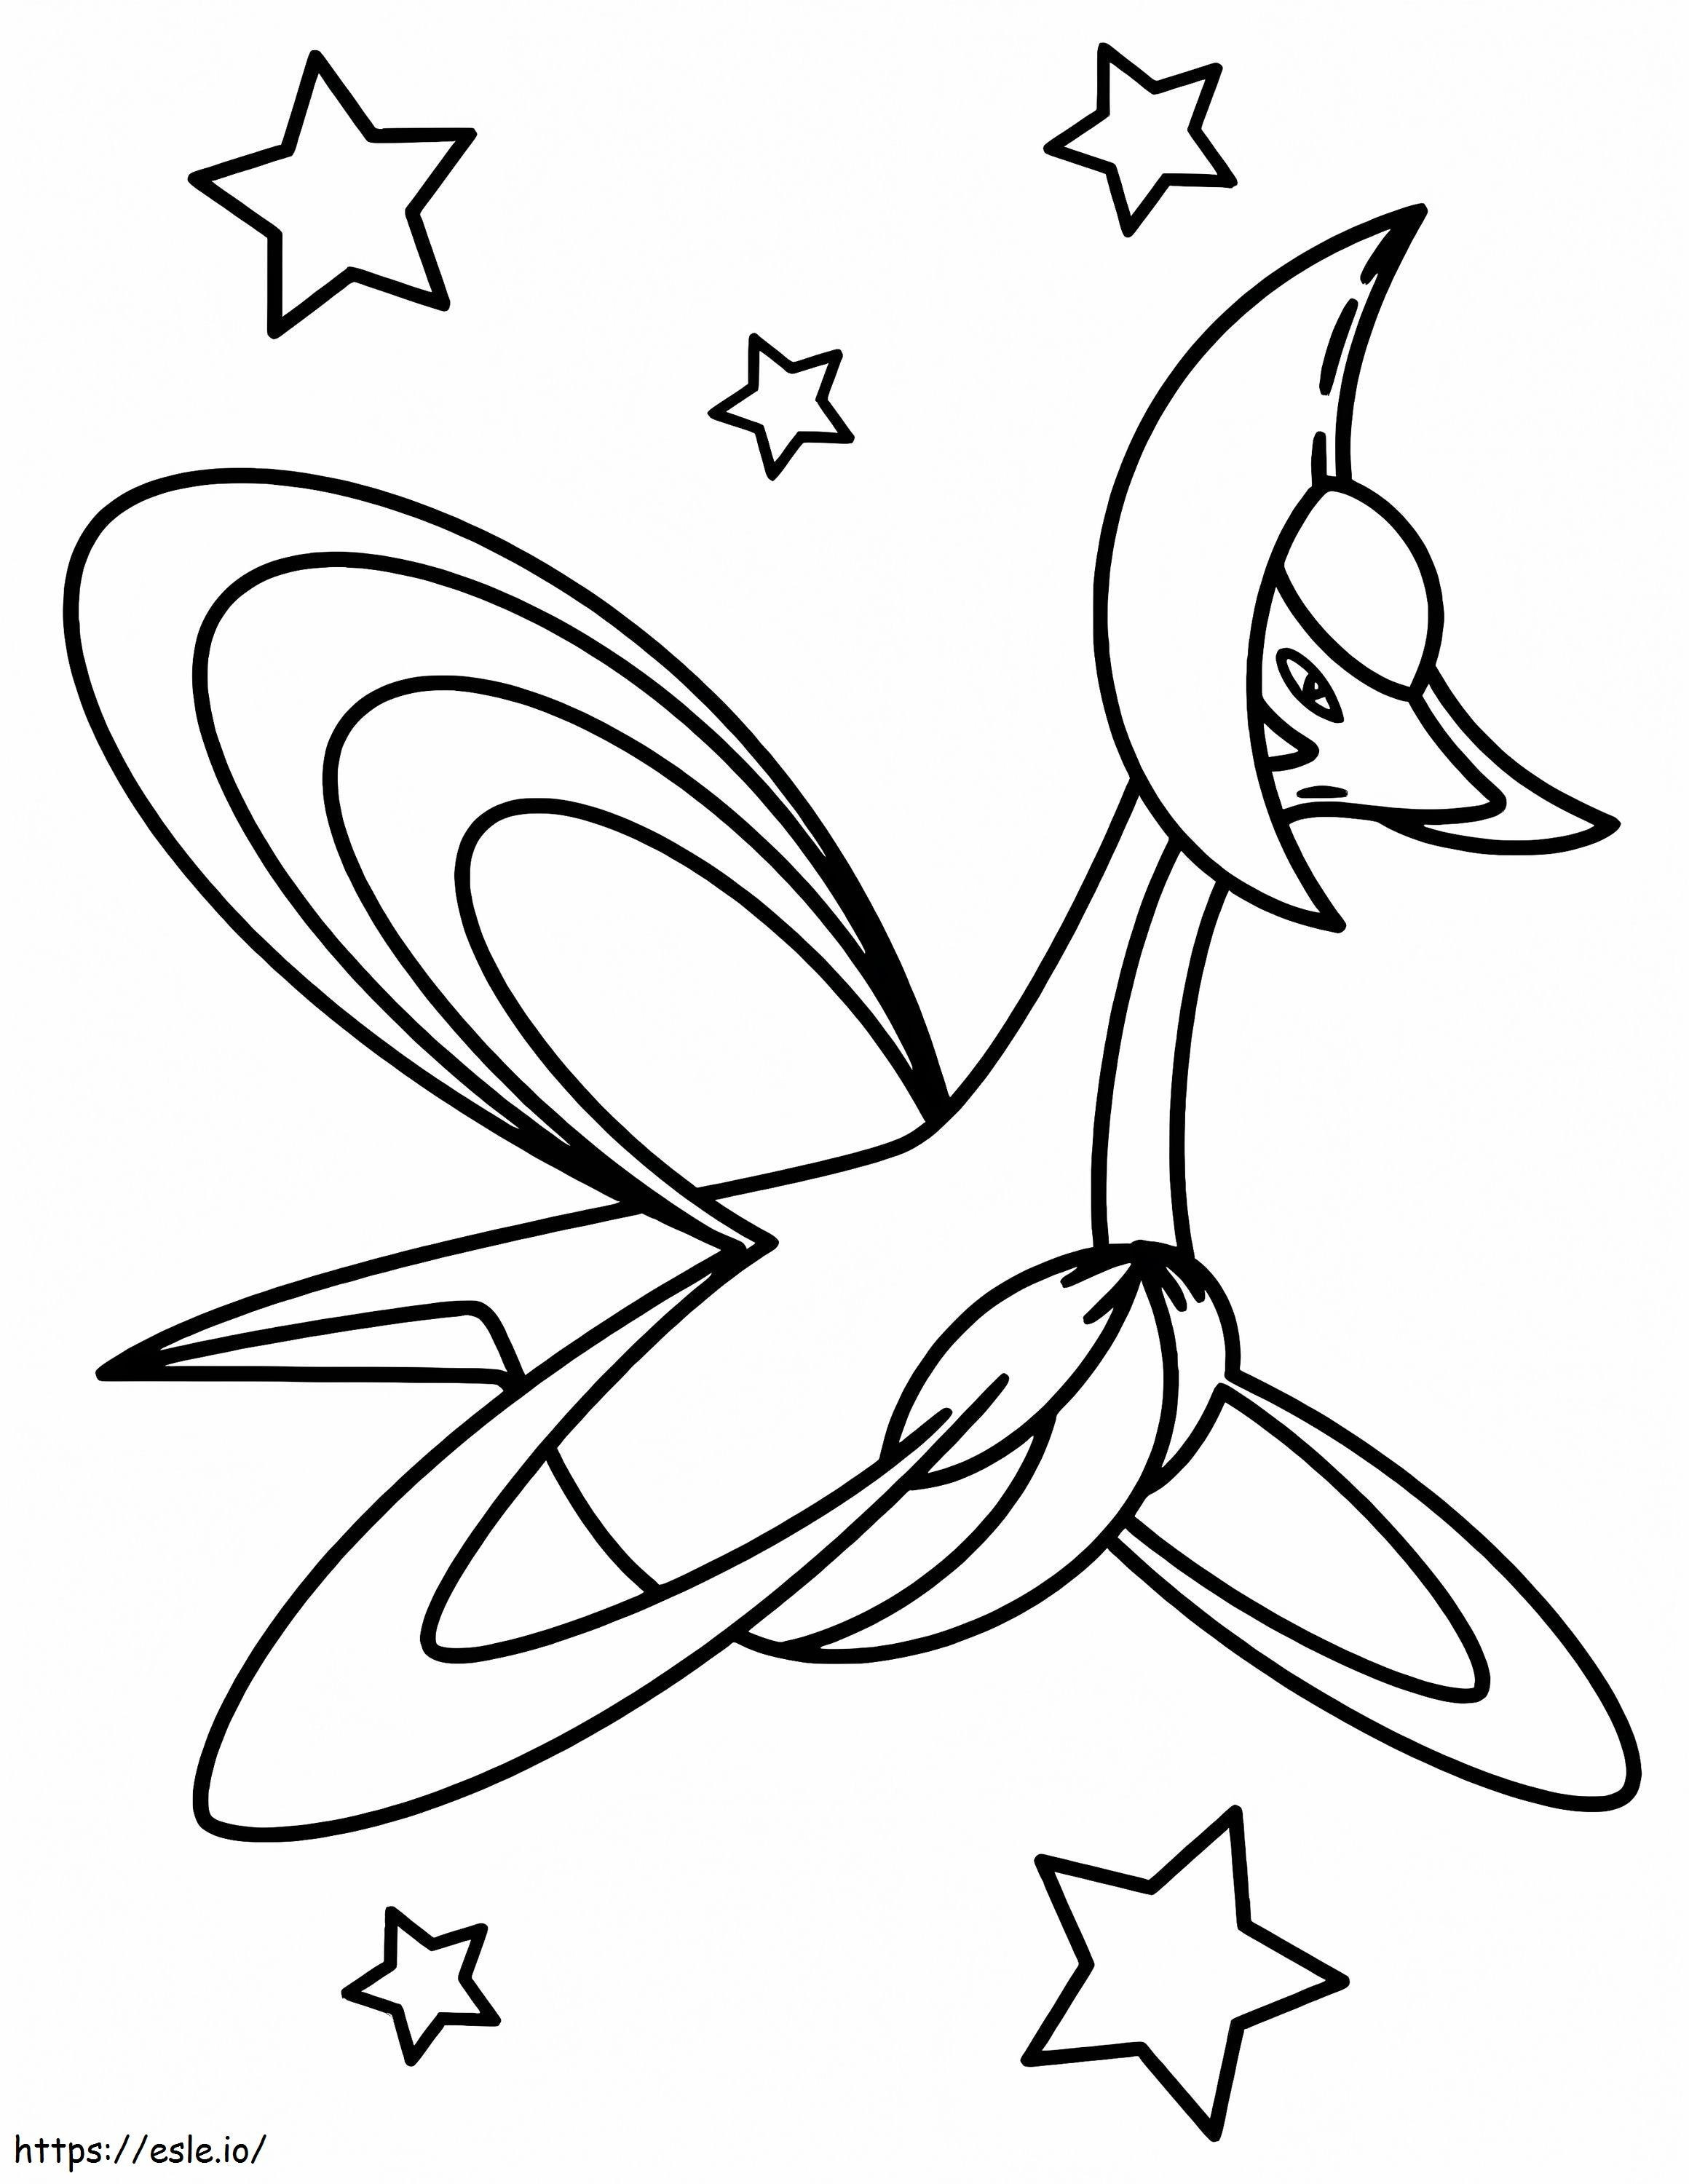 Cresselia With Stars coloring page